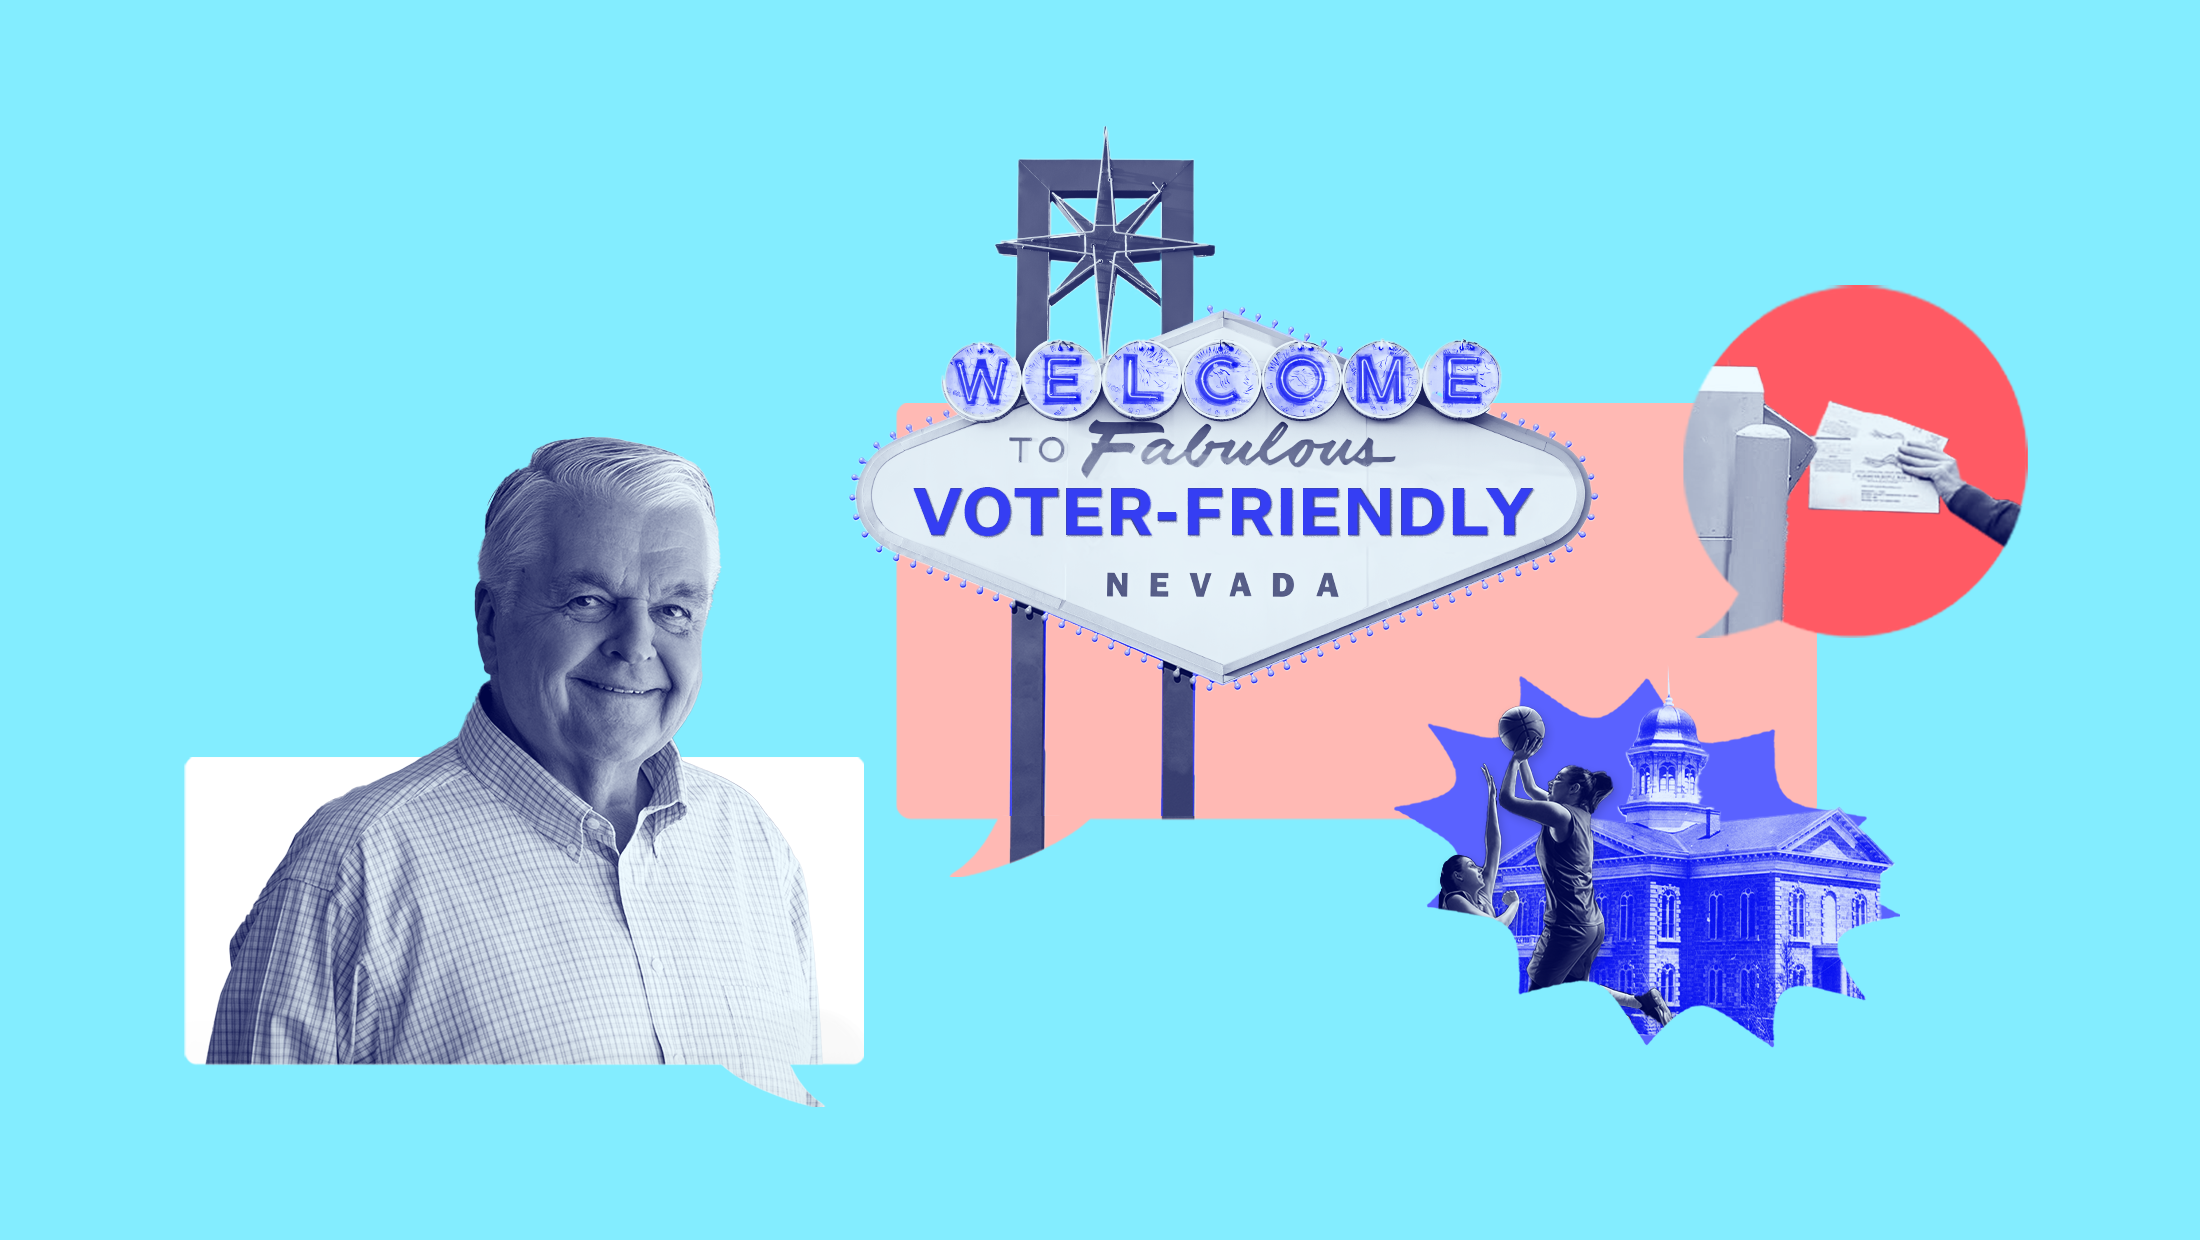 Light blue background with blue-toned image of Nevada Gov. Steve Sisolak, a sign that reads "Welcome to Fabulous Voter-Friendly Nevada," an image of someone putting ballots into a drop box, a blue-toned image of the Nevada state capitol and two Las Vegas Aces players playing basketball.